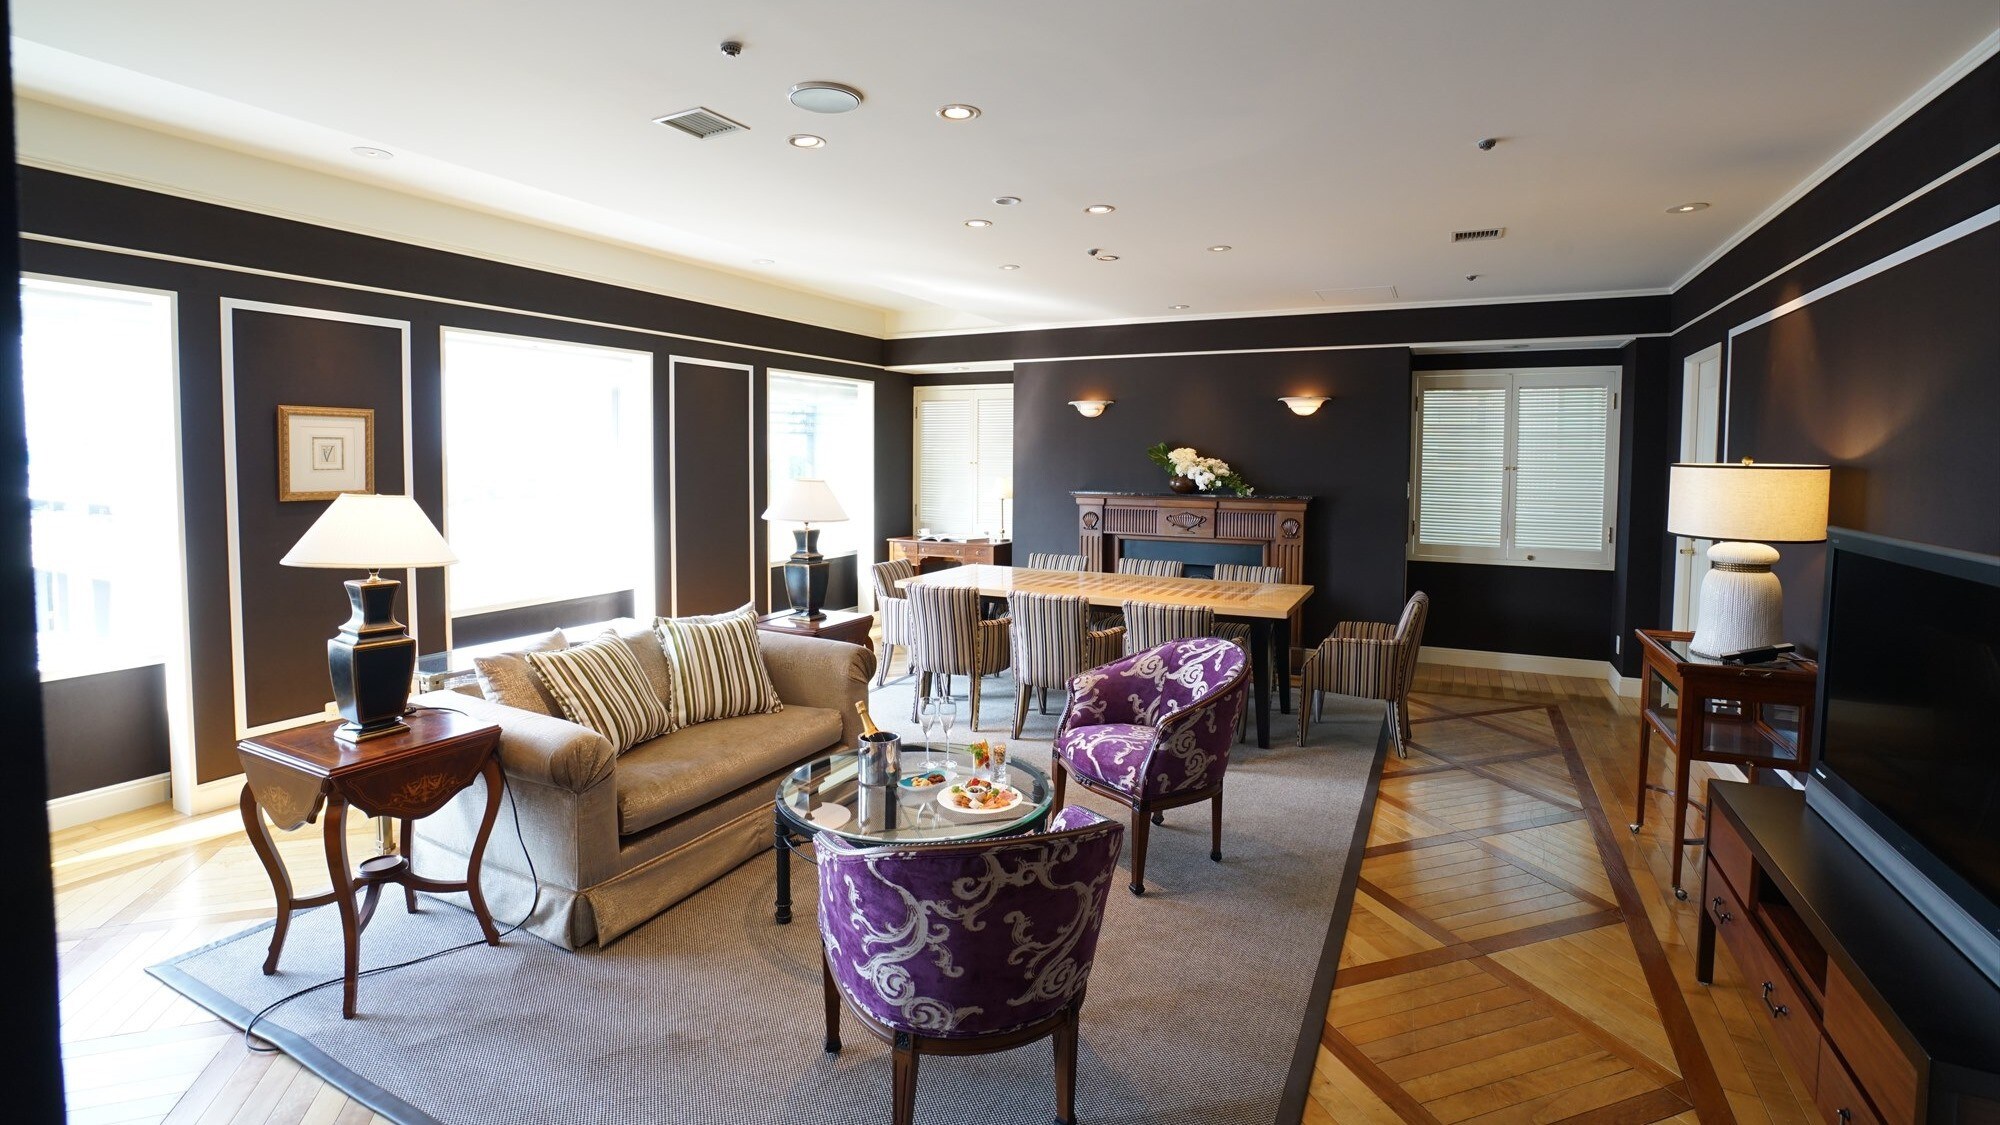 ◆Royal Suite｜The suite room leads to a more elegant and high-quality space for adults.